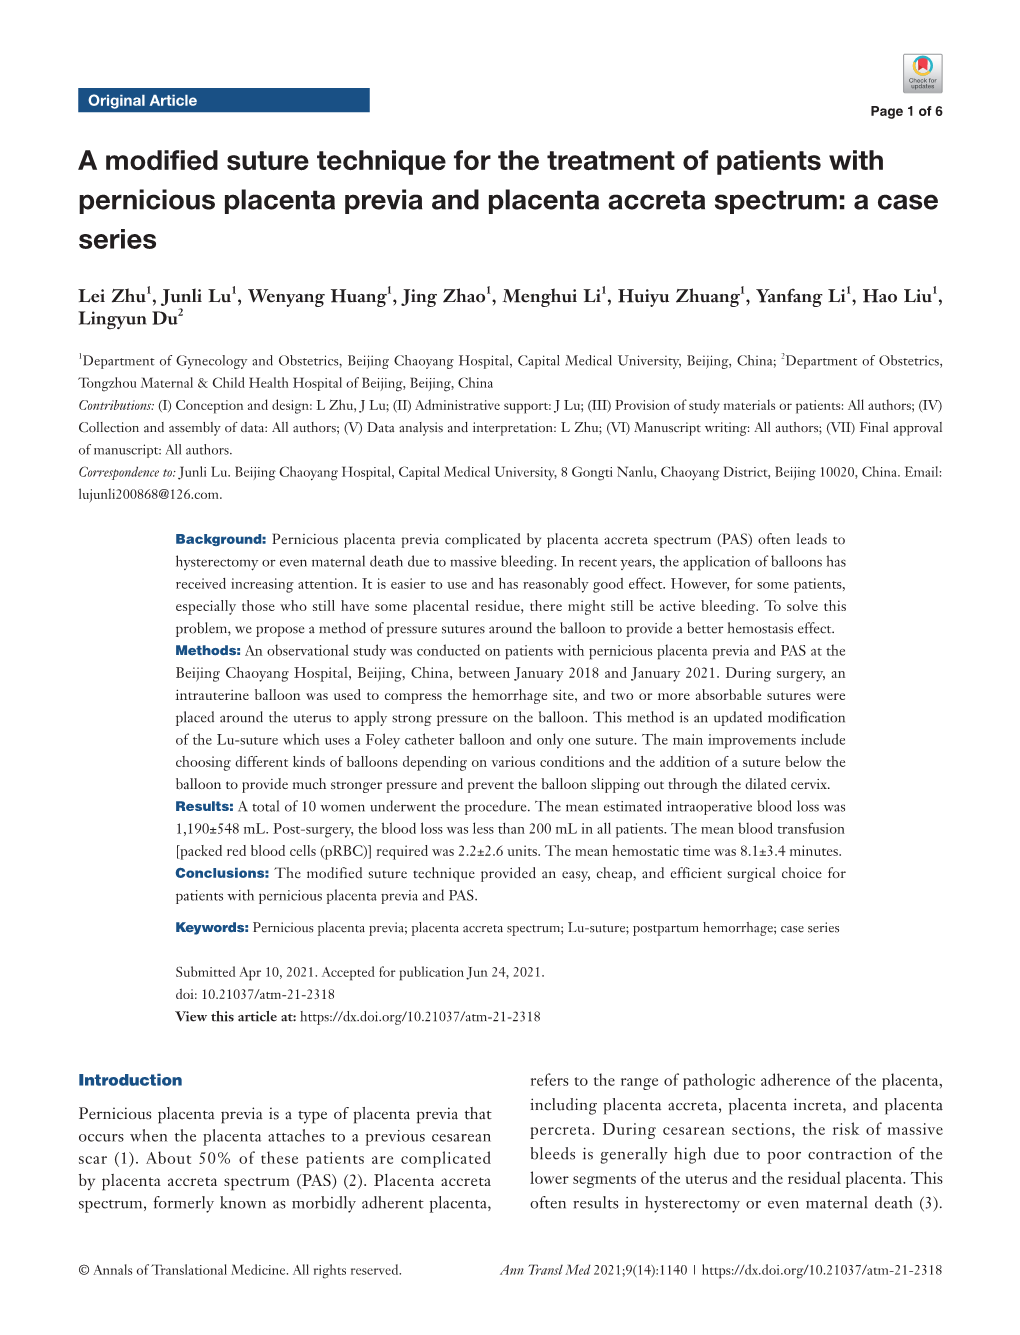 A Modified Suture Technique for the Treatment of Patients with Pernicious Placenta Previa and Placenta Accreta Spectrum: a Case Series